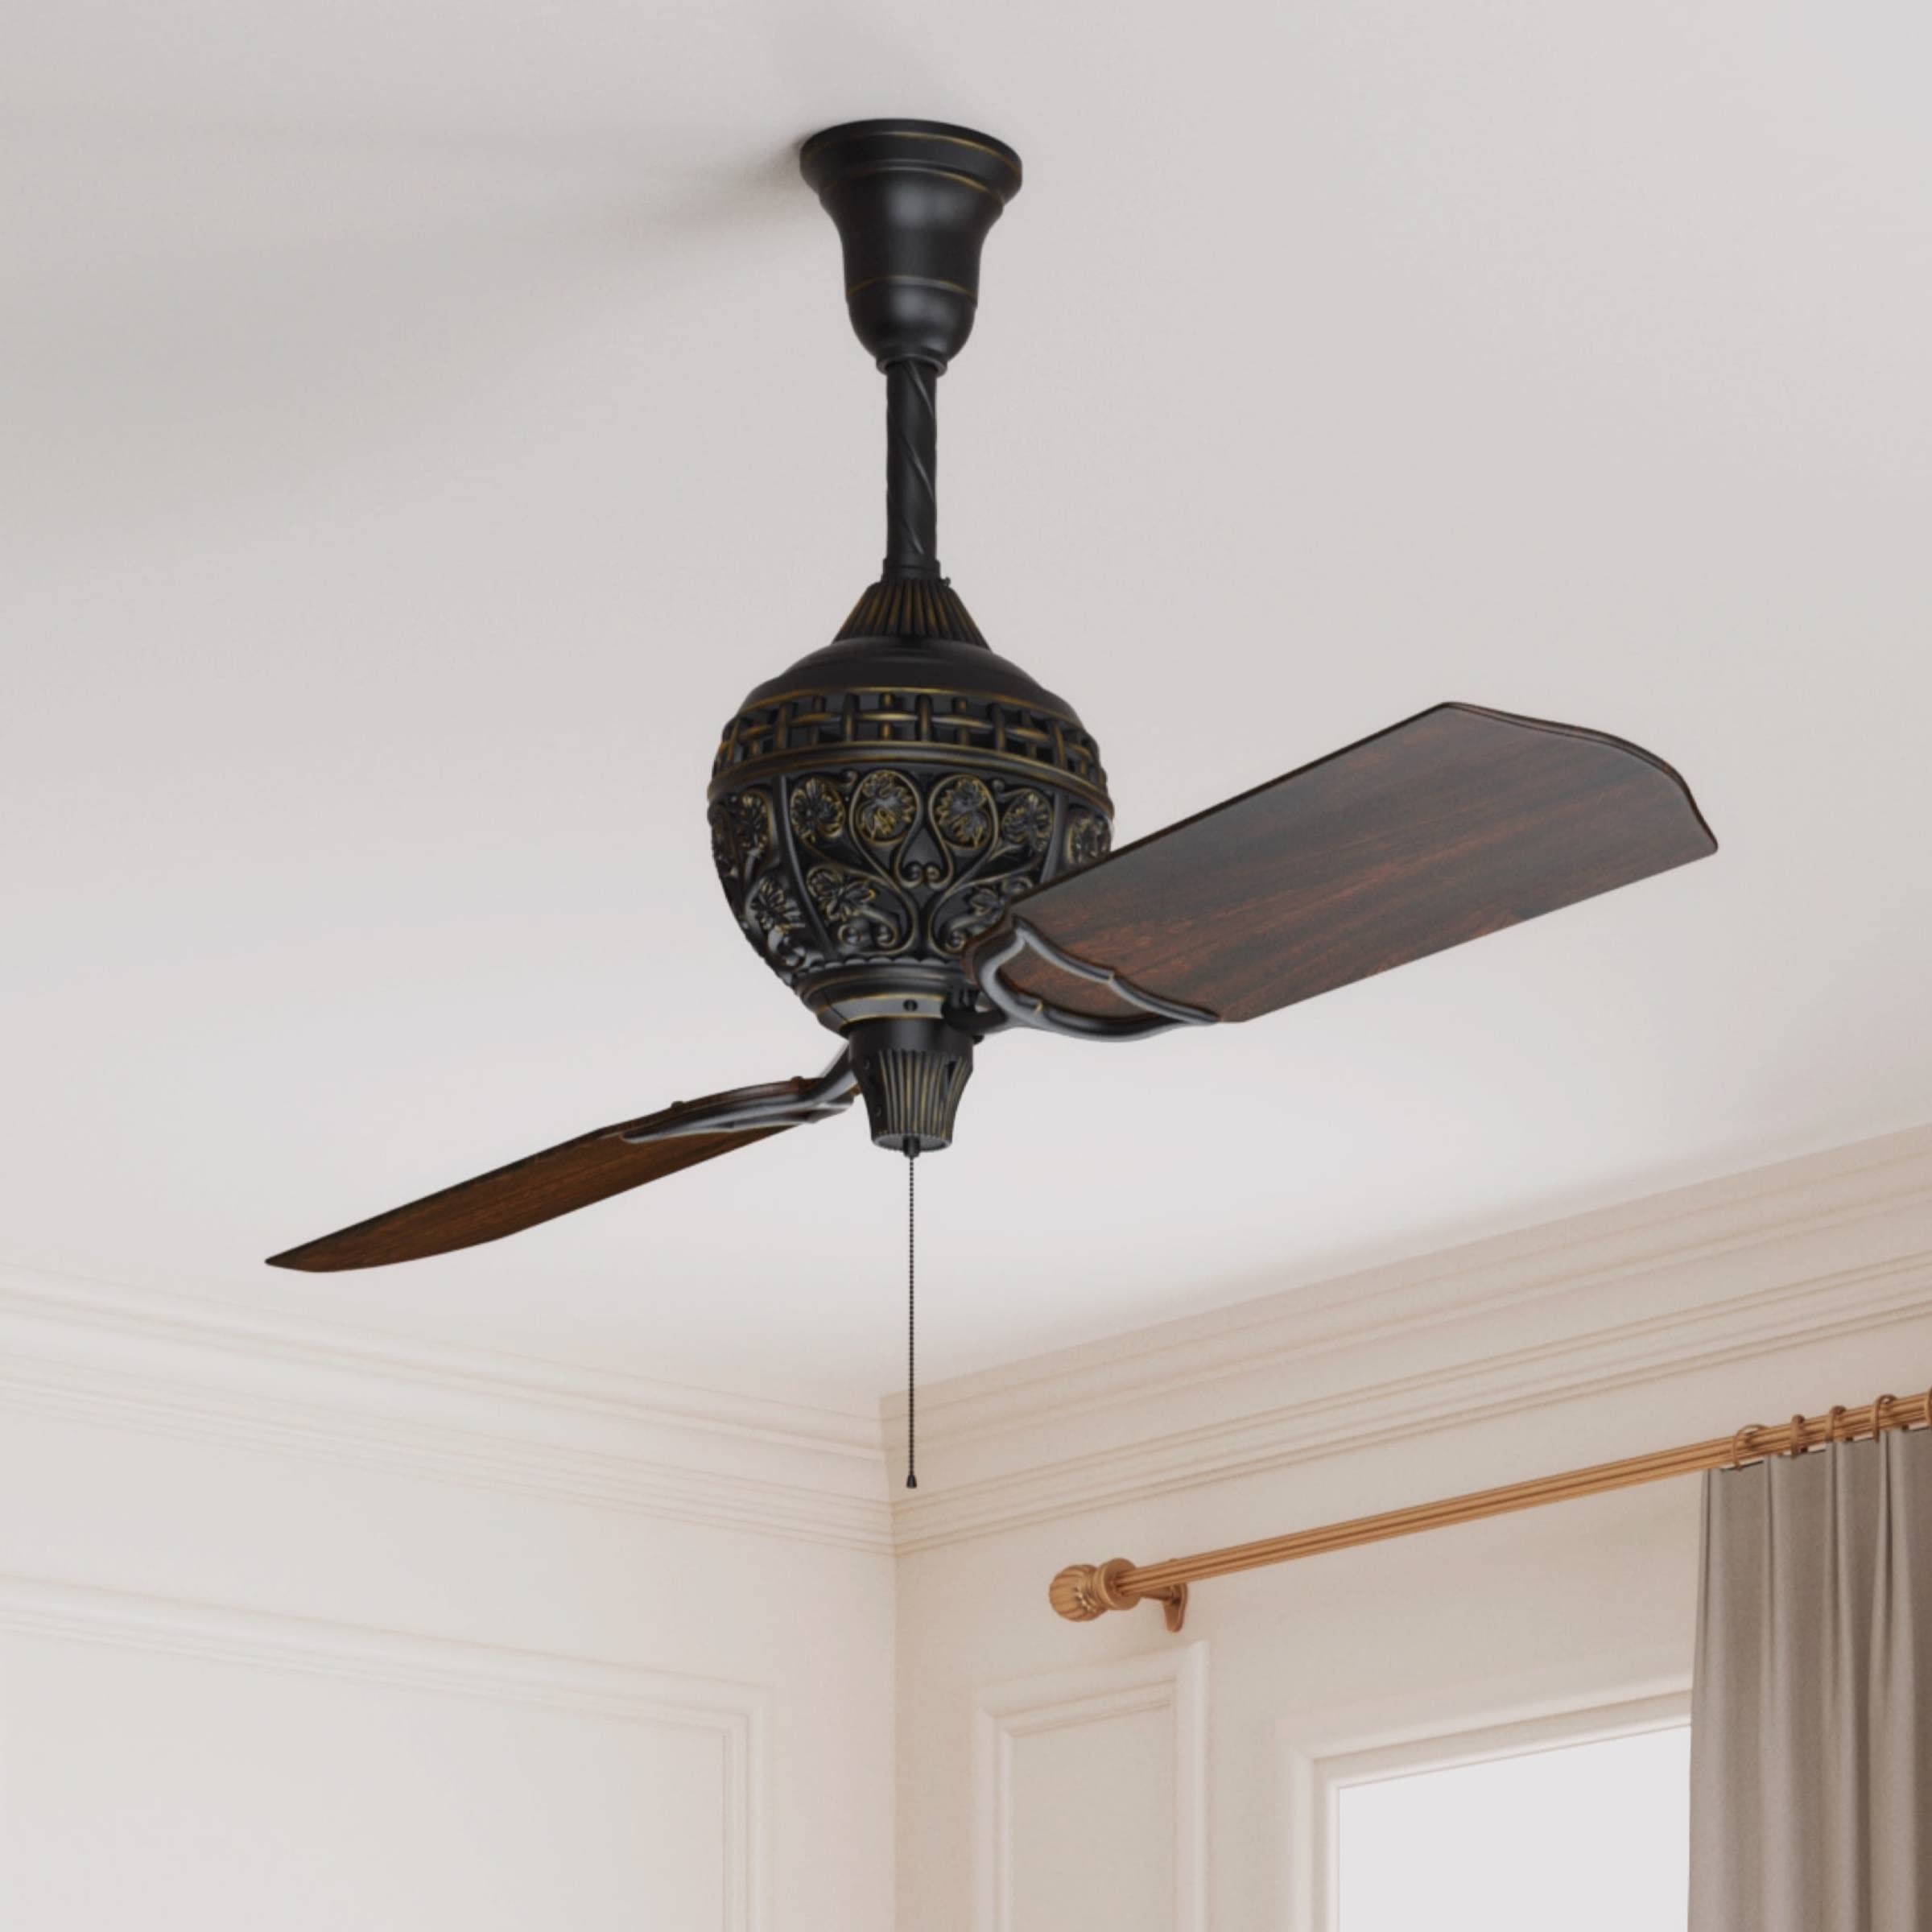 Hunter Fan Company 18865 Hunter 1886 Limited Edition Indoor Ceiling Fan with Pull Chain Control, 60